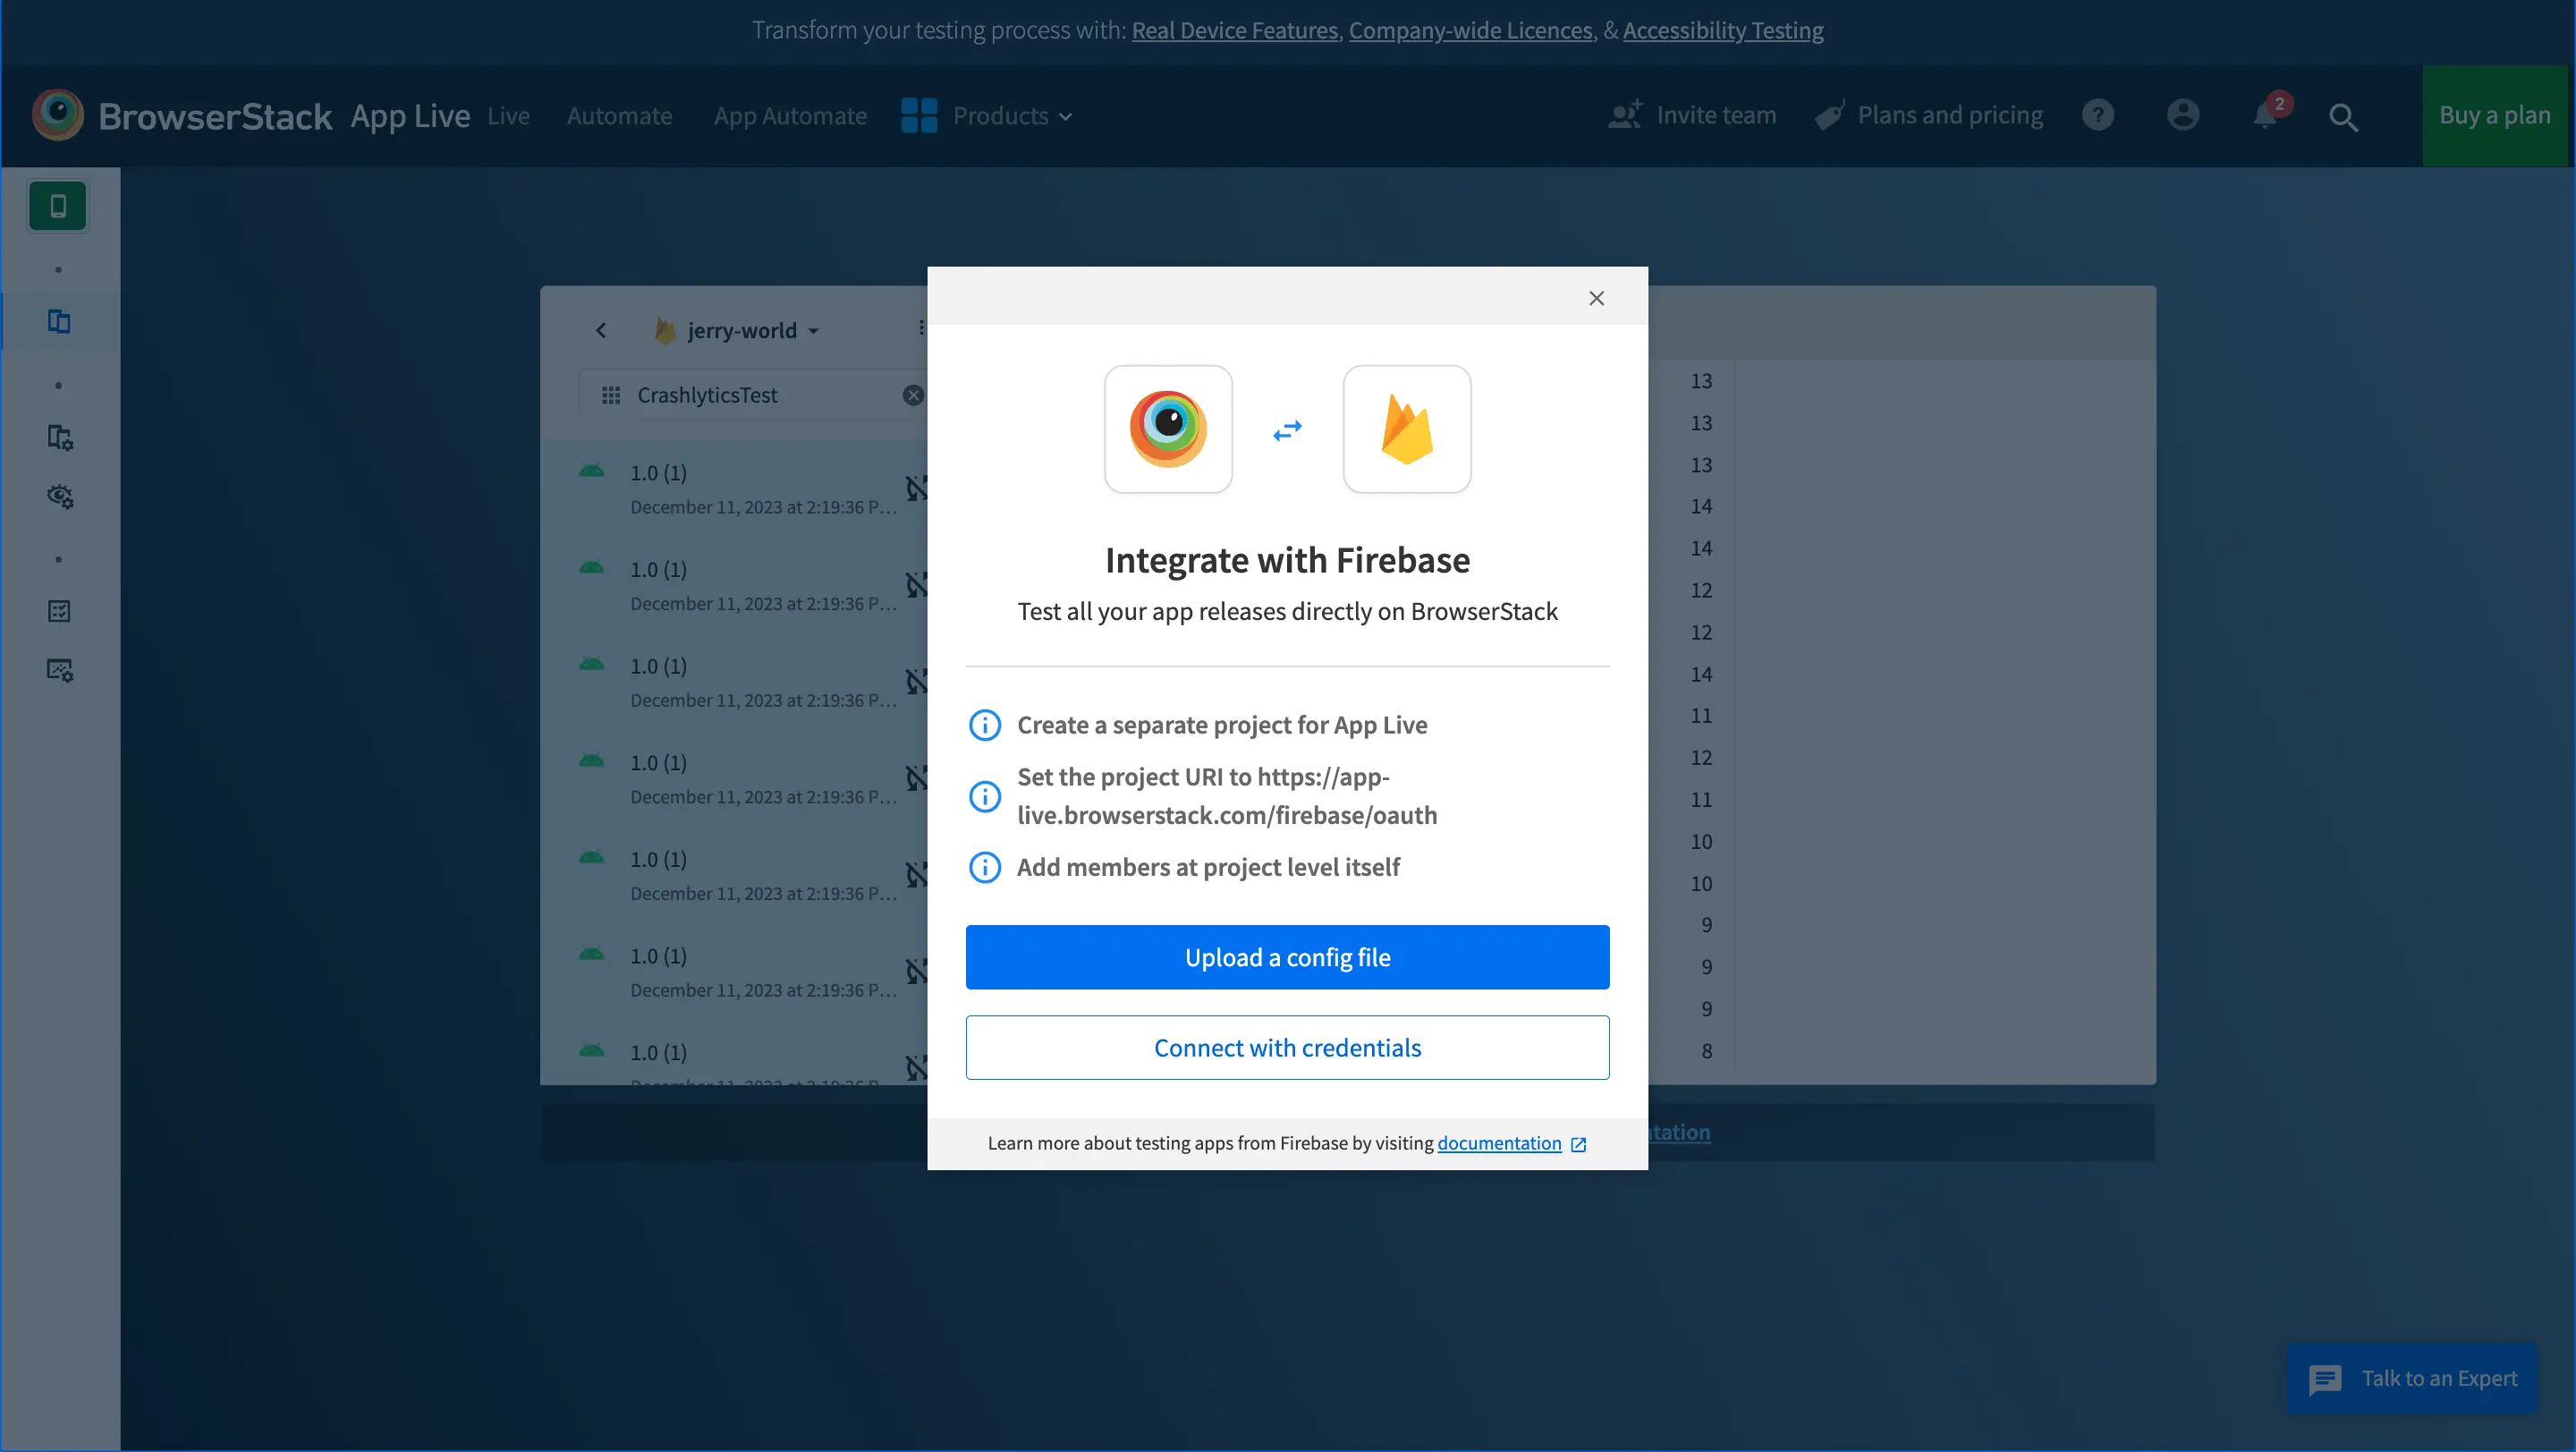 Integrate with Firebase prompt another